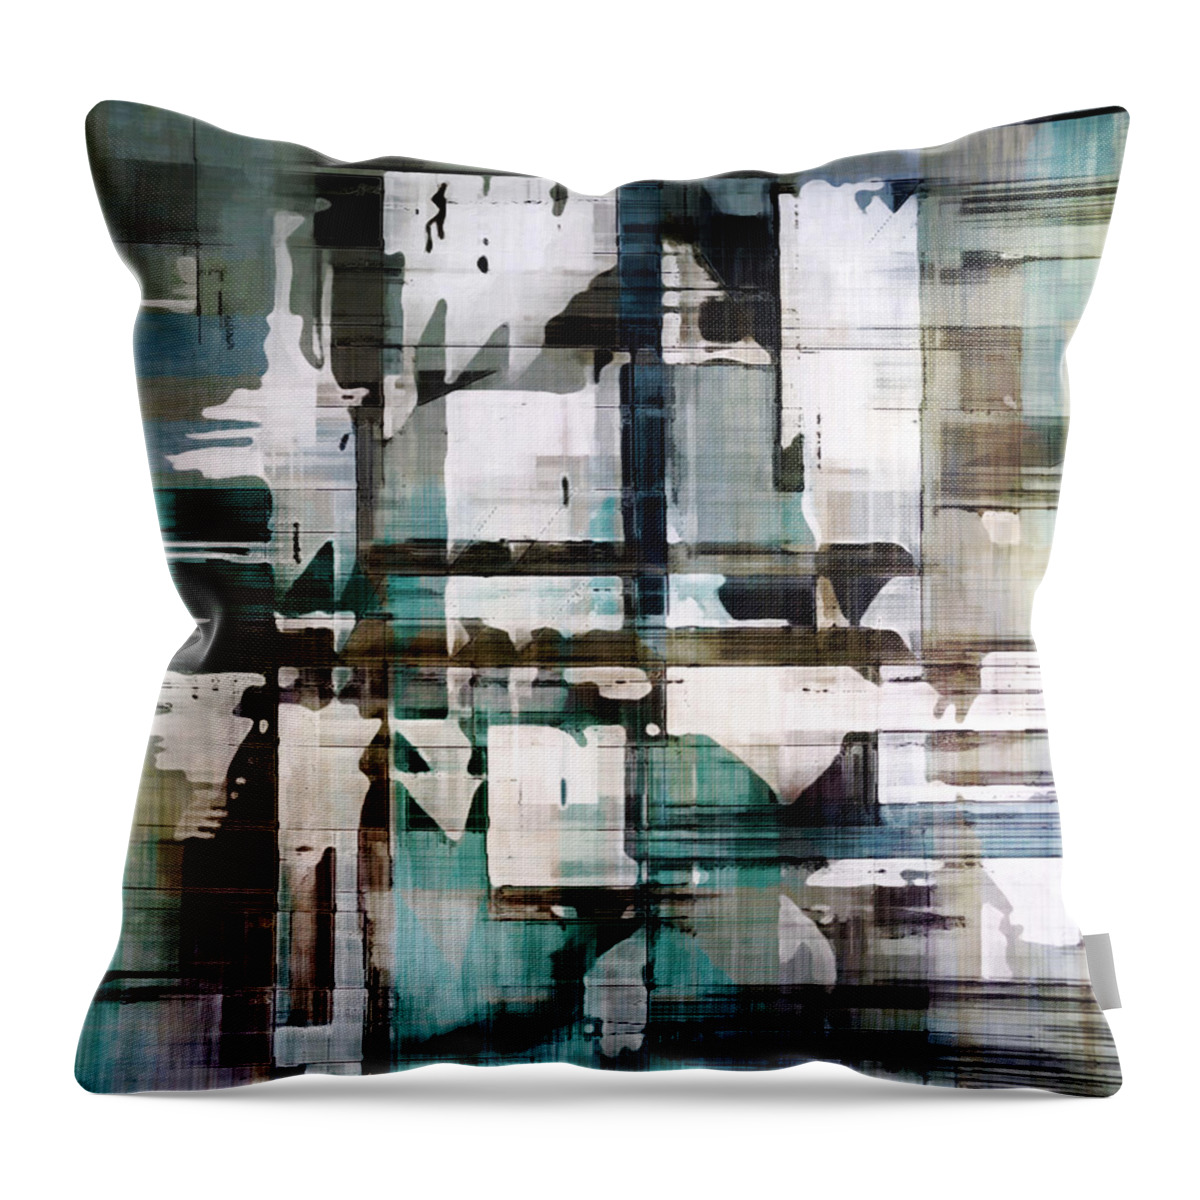  Throw Pillow featuring the digital art Tranquility Base by David Hansen